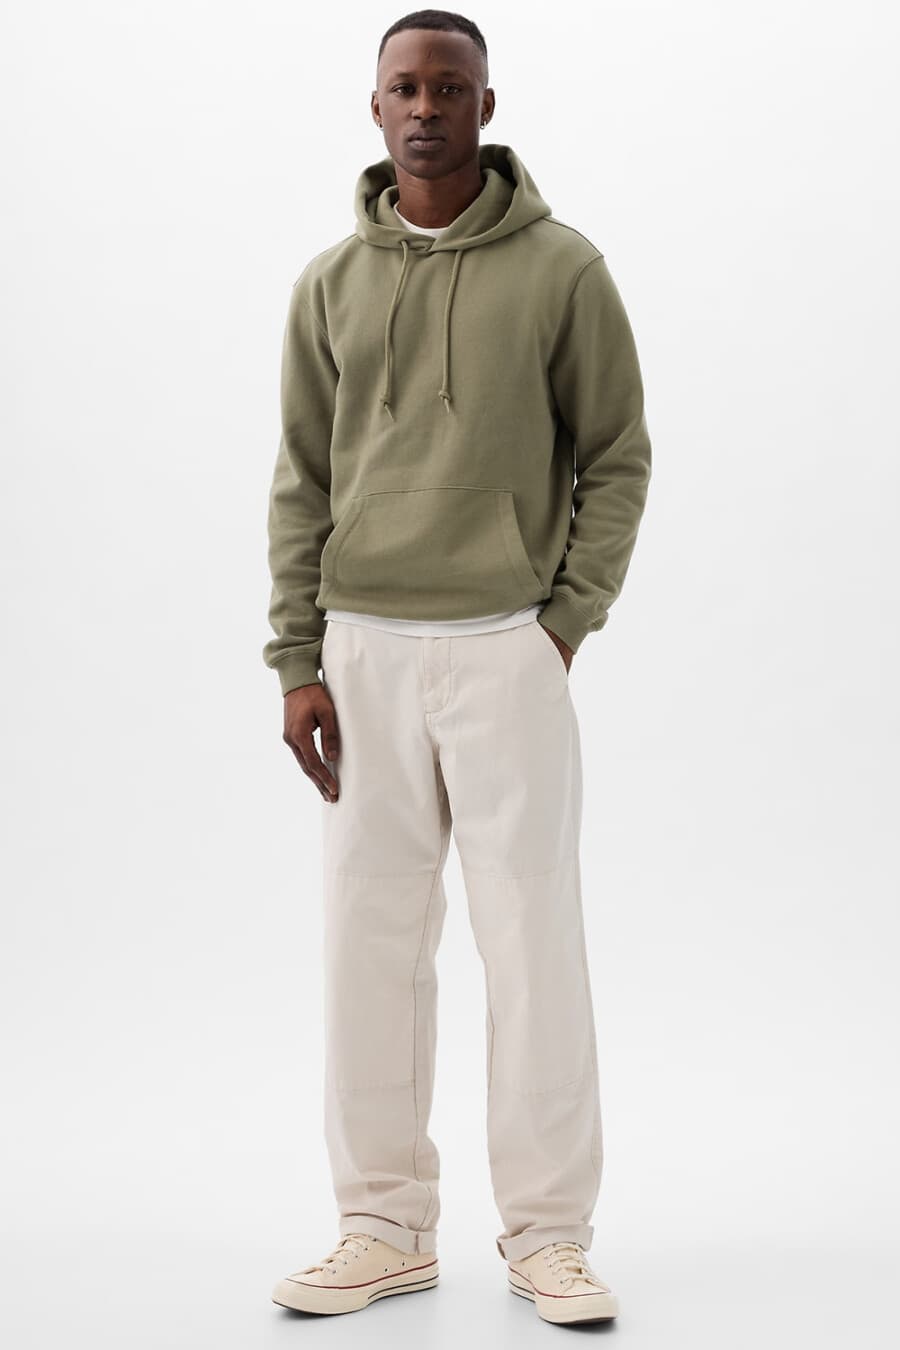 Men's loose white jeans, white T-shirt, green hoodie and off-white Converse canvas sneakers outfit